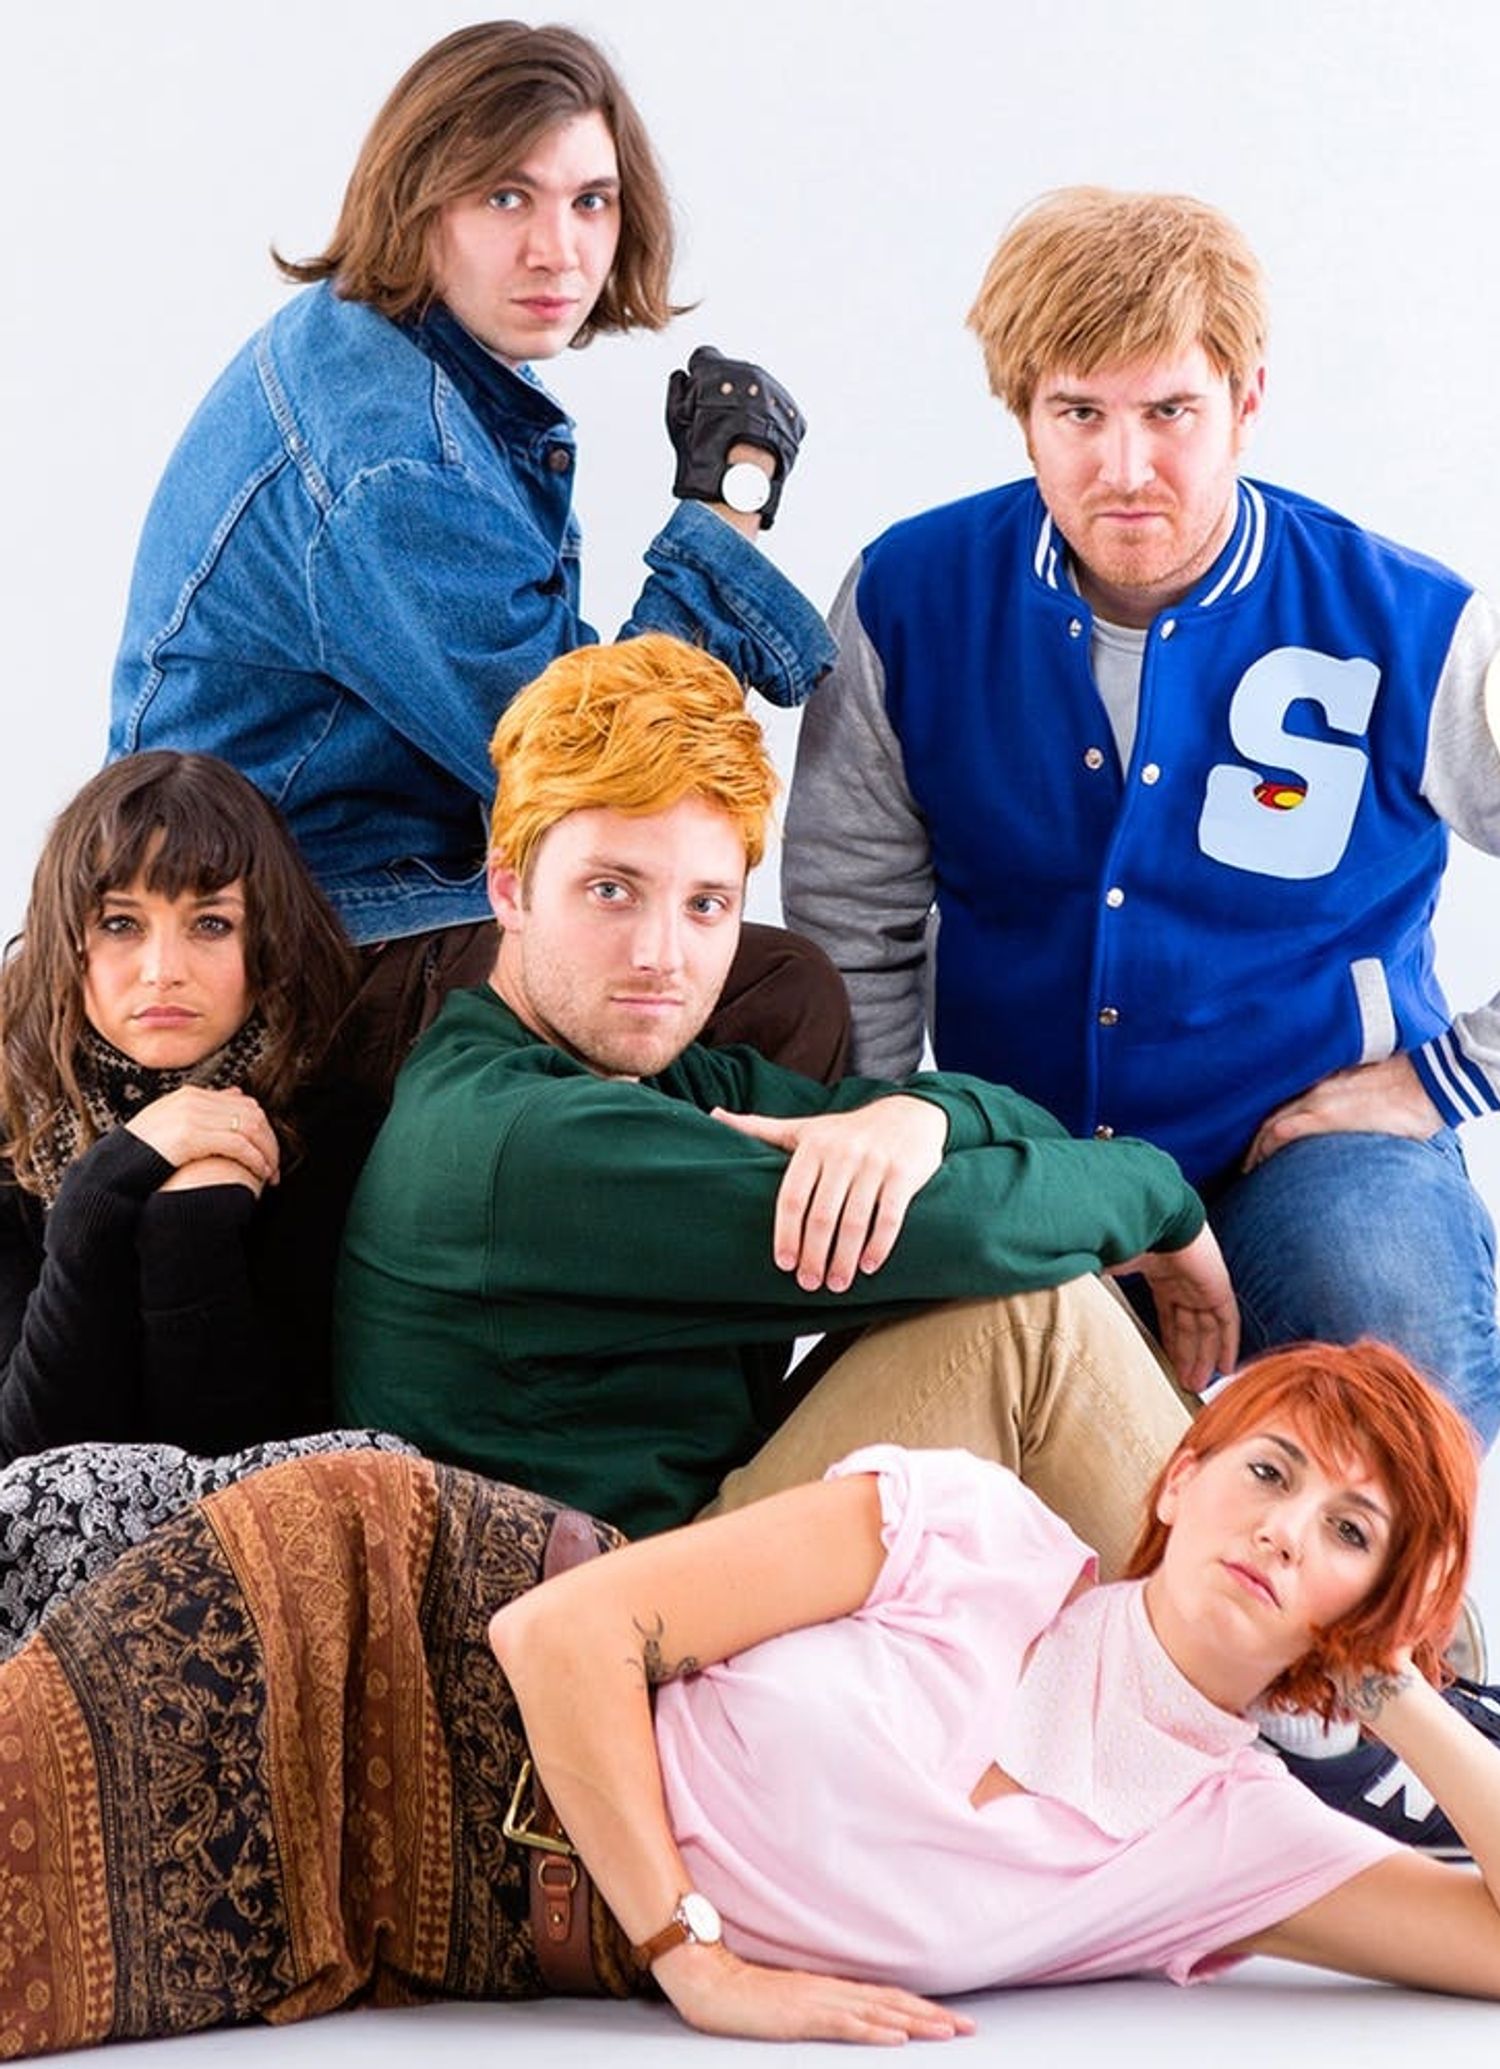 Head to Detention With This Breakfast Club Group Costume - Brit + Co